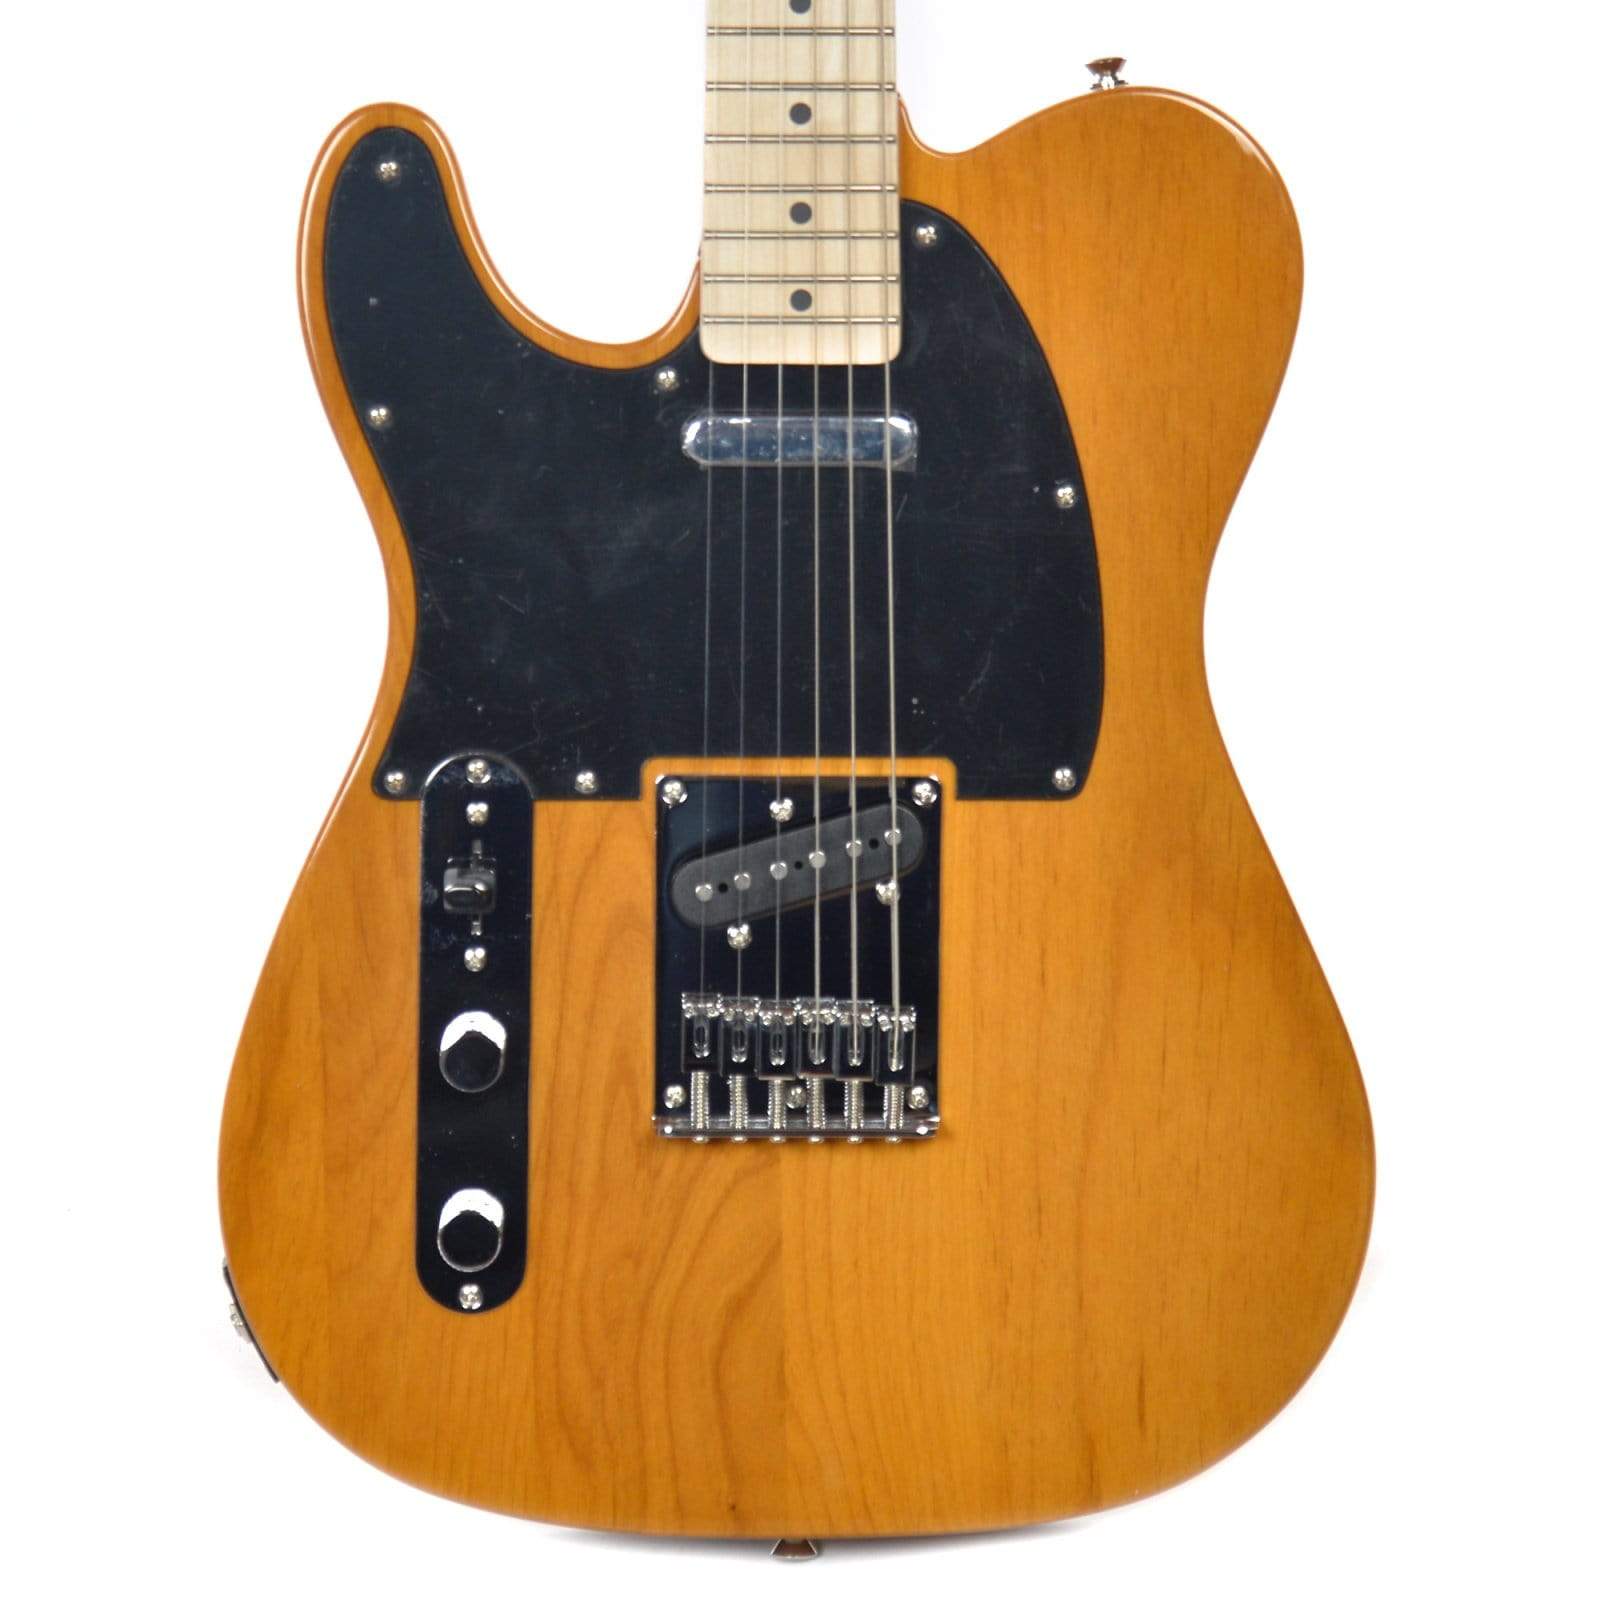 Squier Affinity Telecaster Butterscotch Blonde Lefty